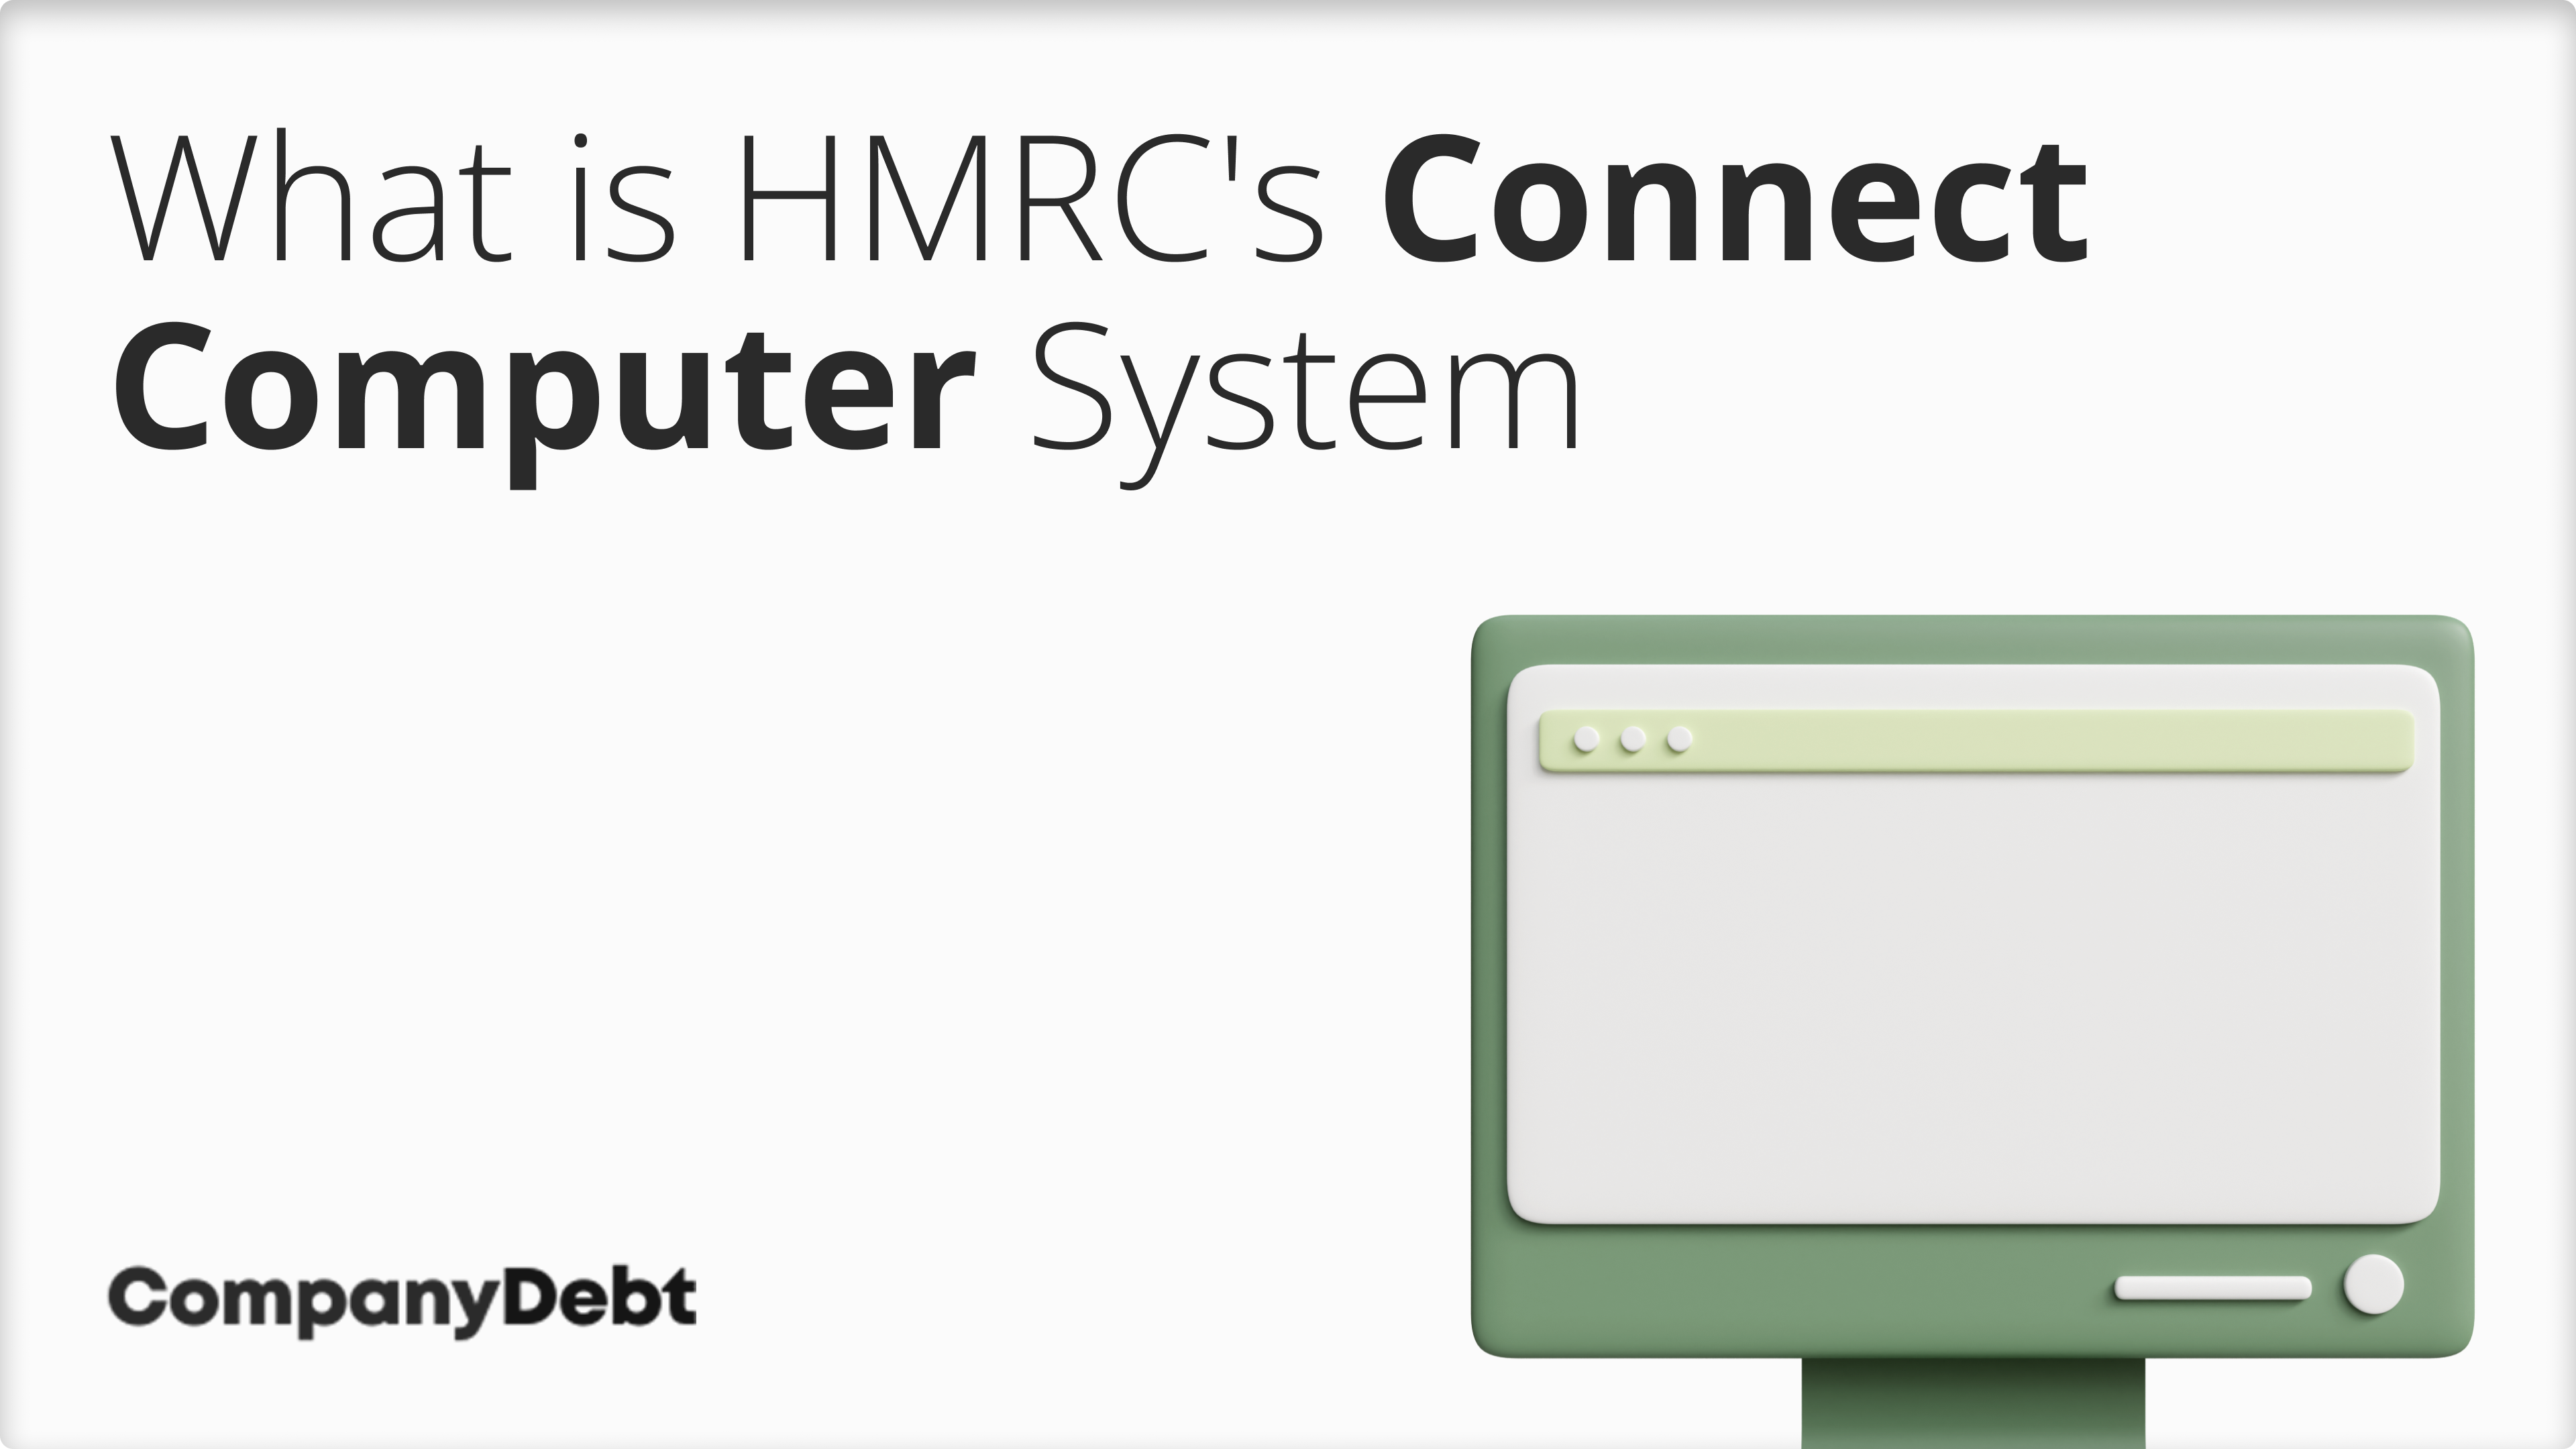 What is HMRC's Connect Computer System and how is it Being Used for Tax Compliance?